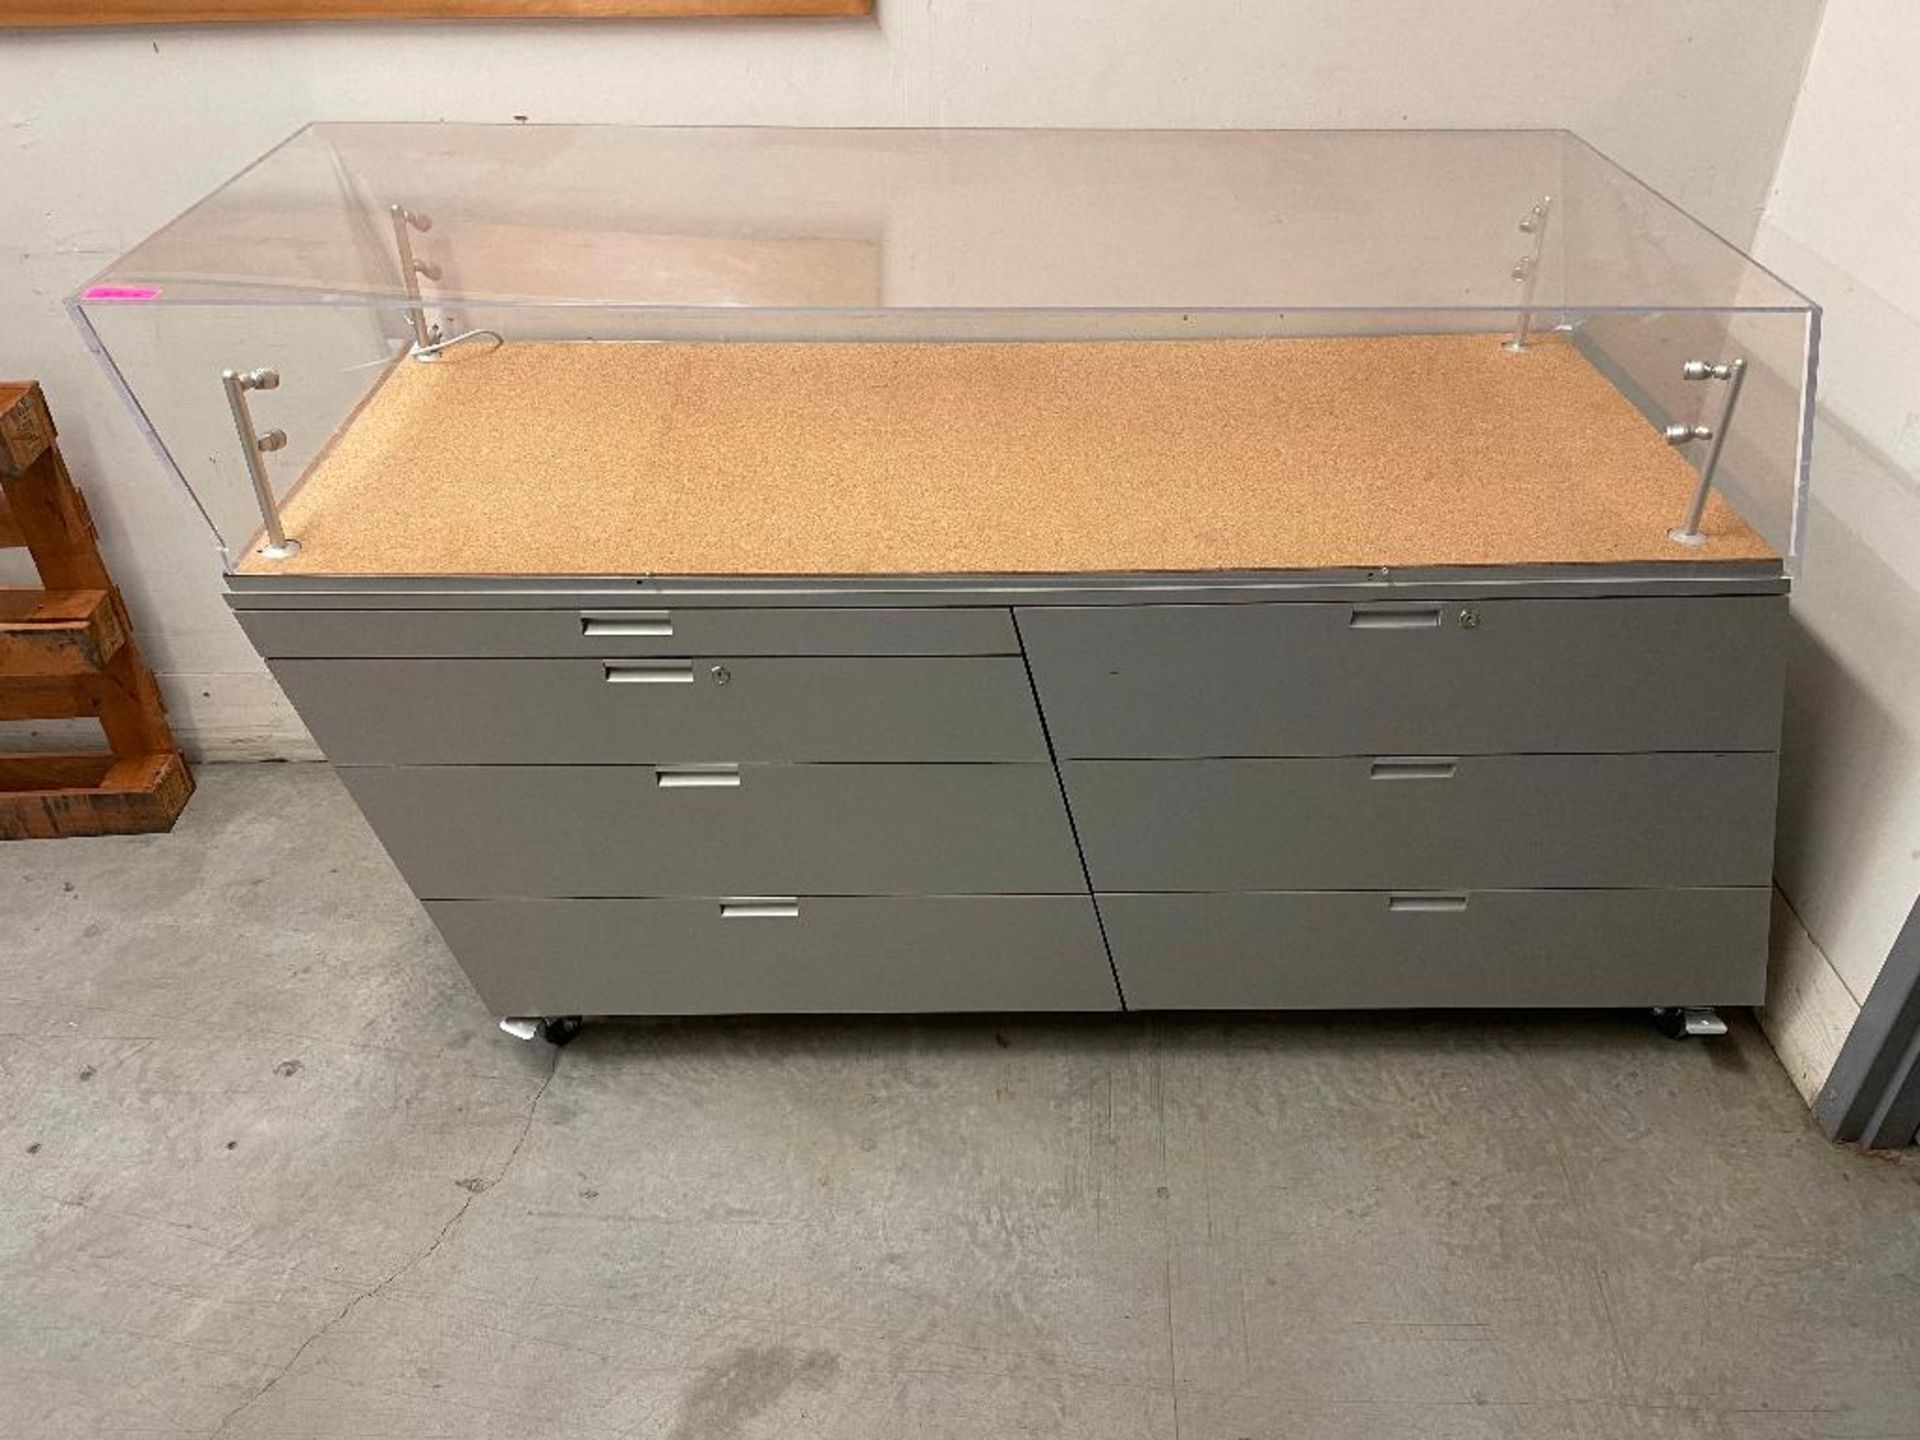 DESCRIPTION: (2) 72" ROLL ABOUT DISPLAY TABLES W/ LOWER DRAWER STORAGE. ADDITIONAL INFORMATION IN RO